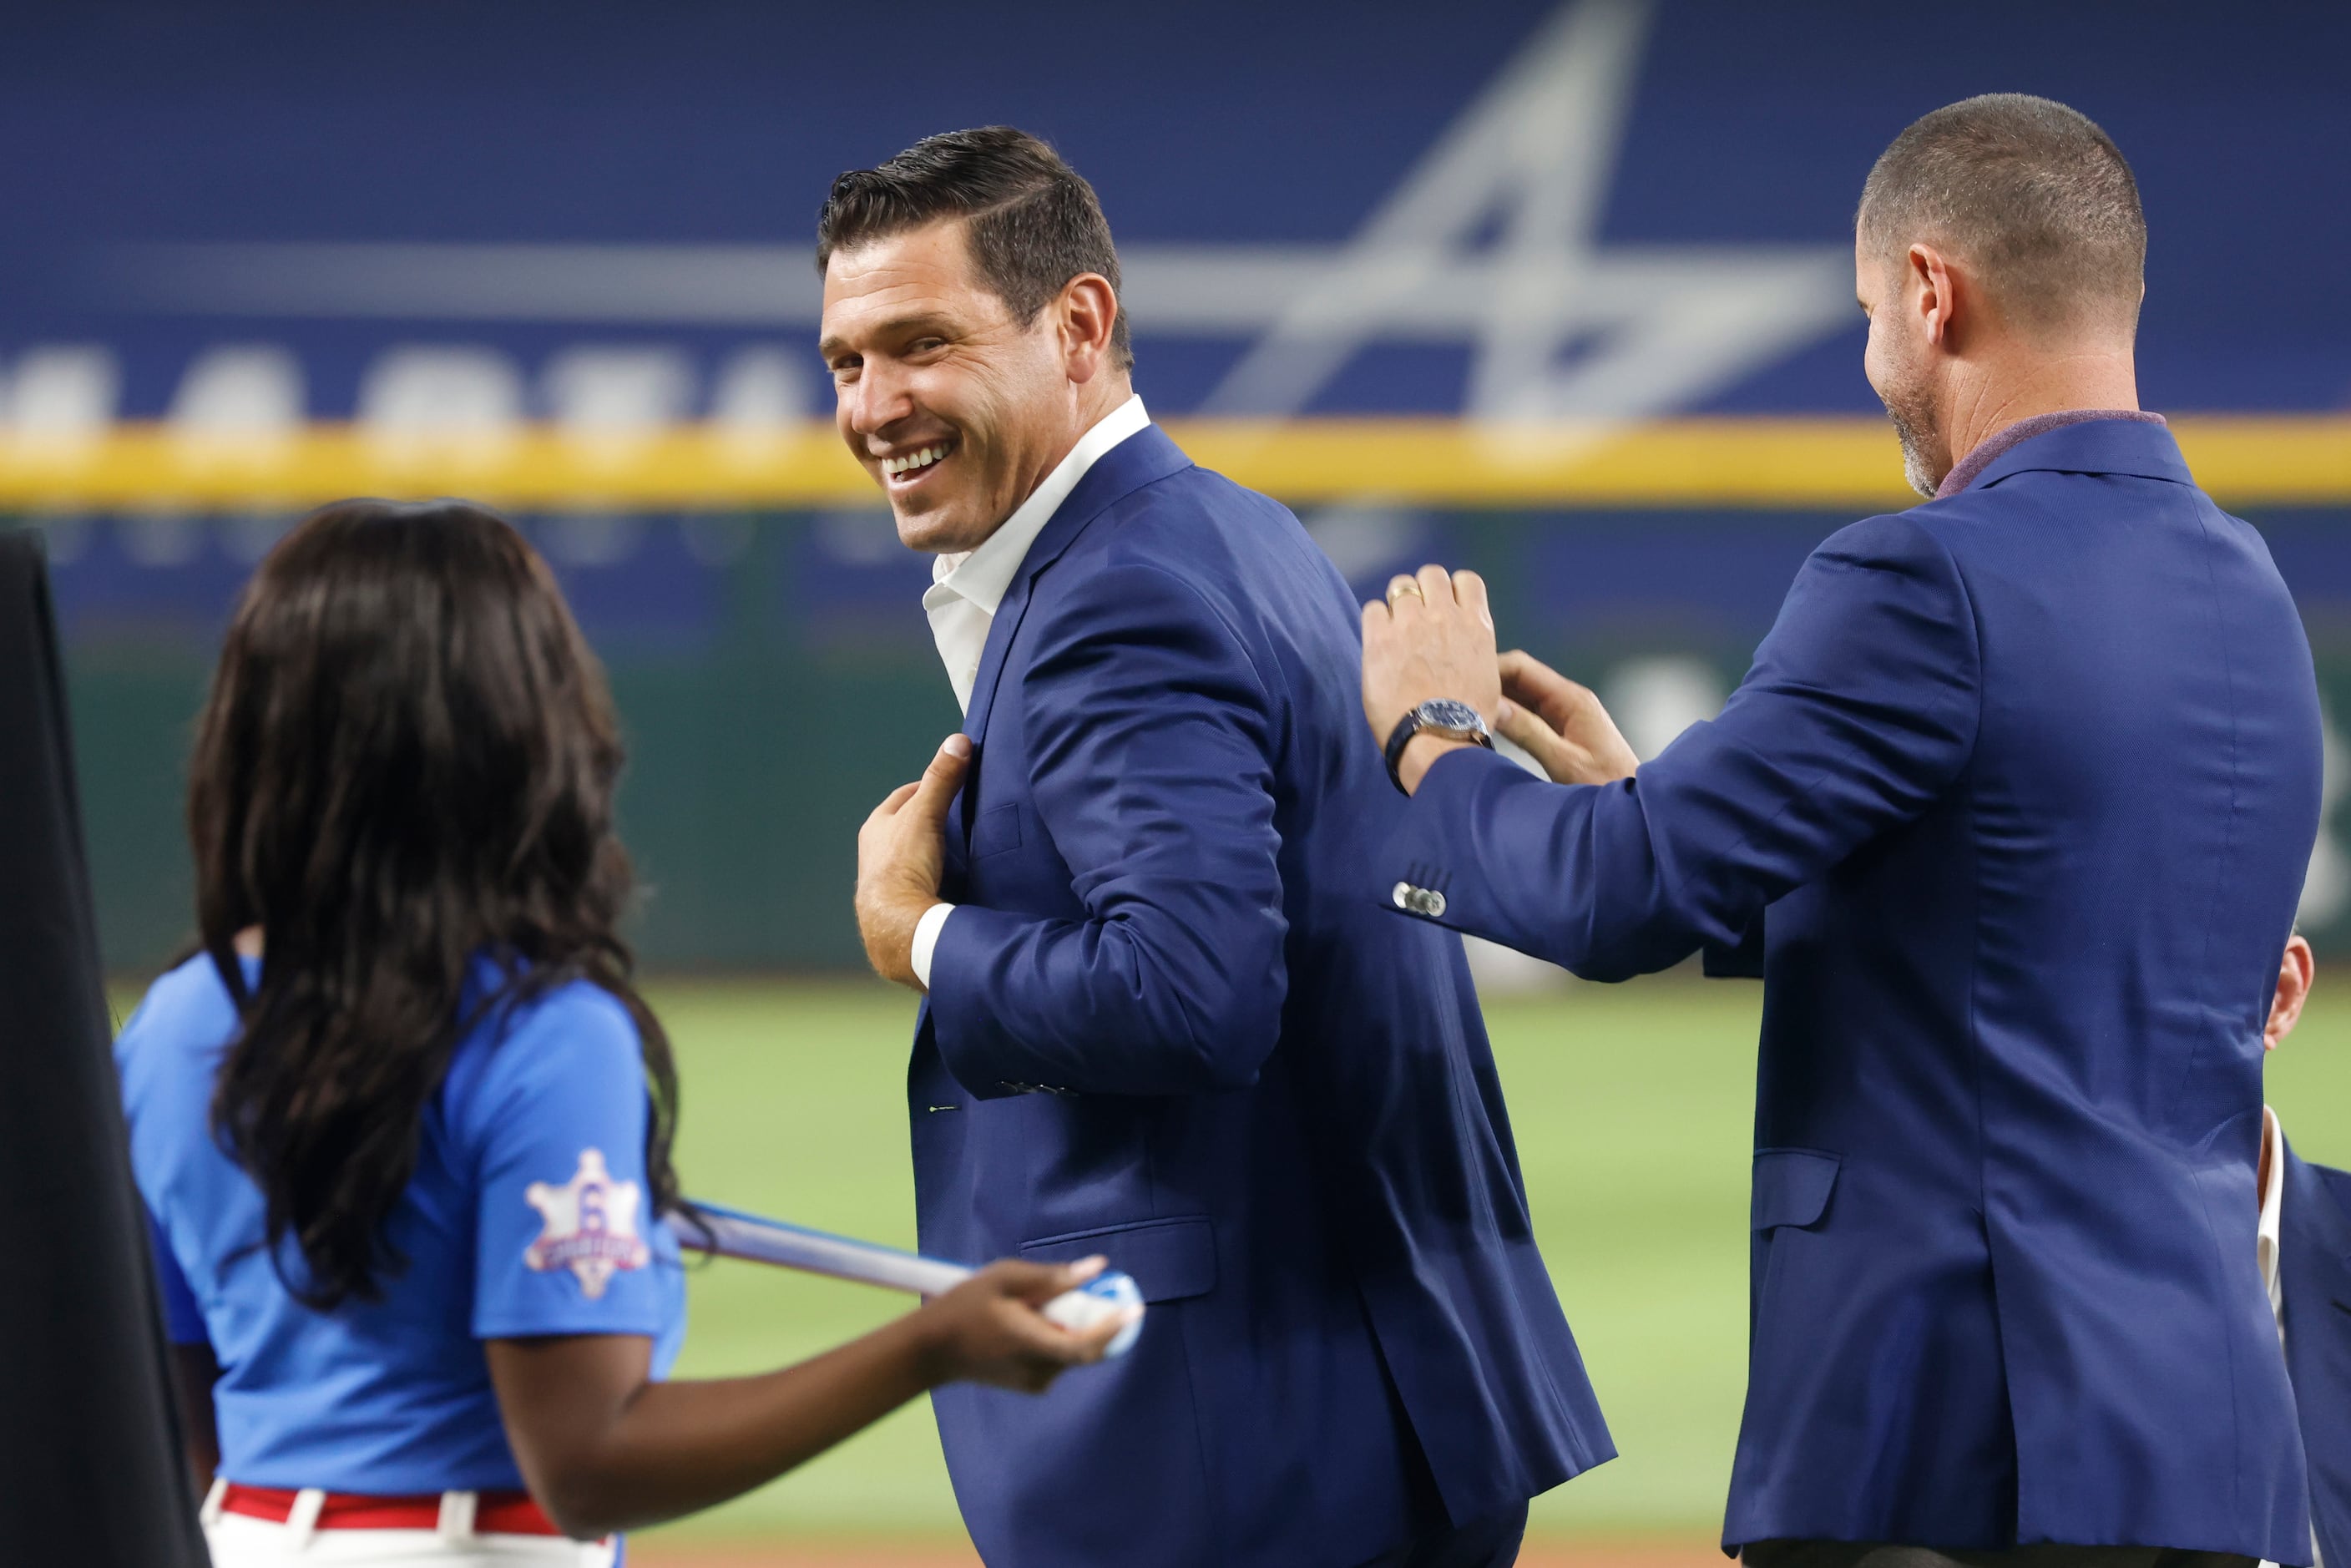 Texas Rangers great Ian Kinsler throws out first pitch wearing